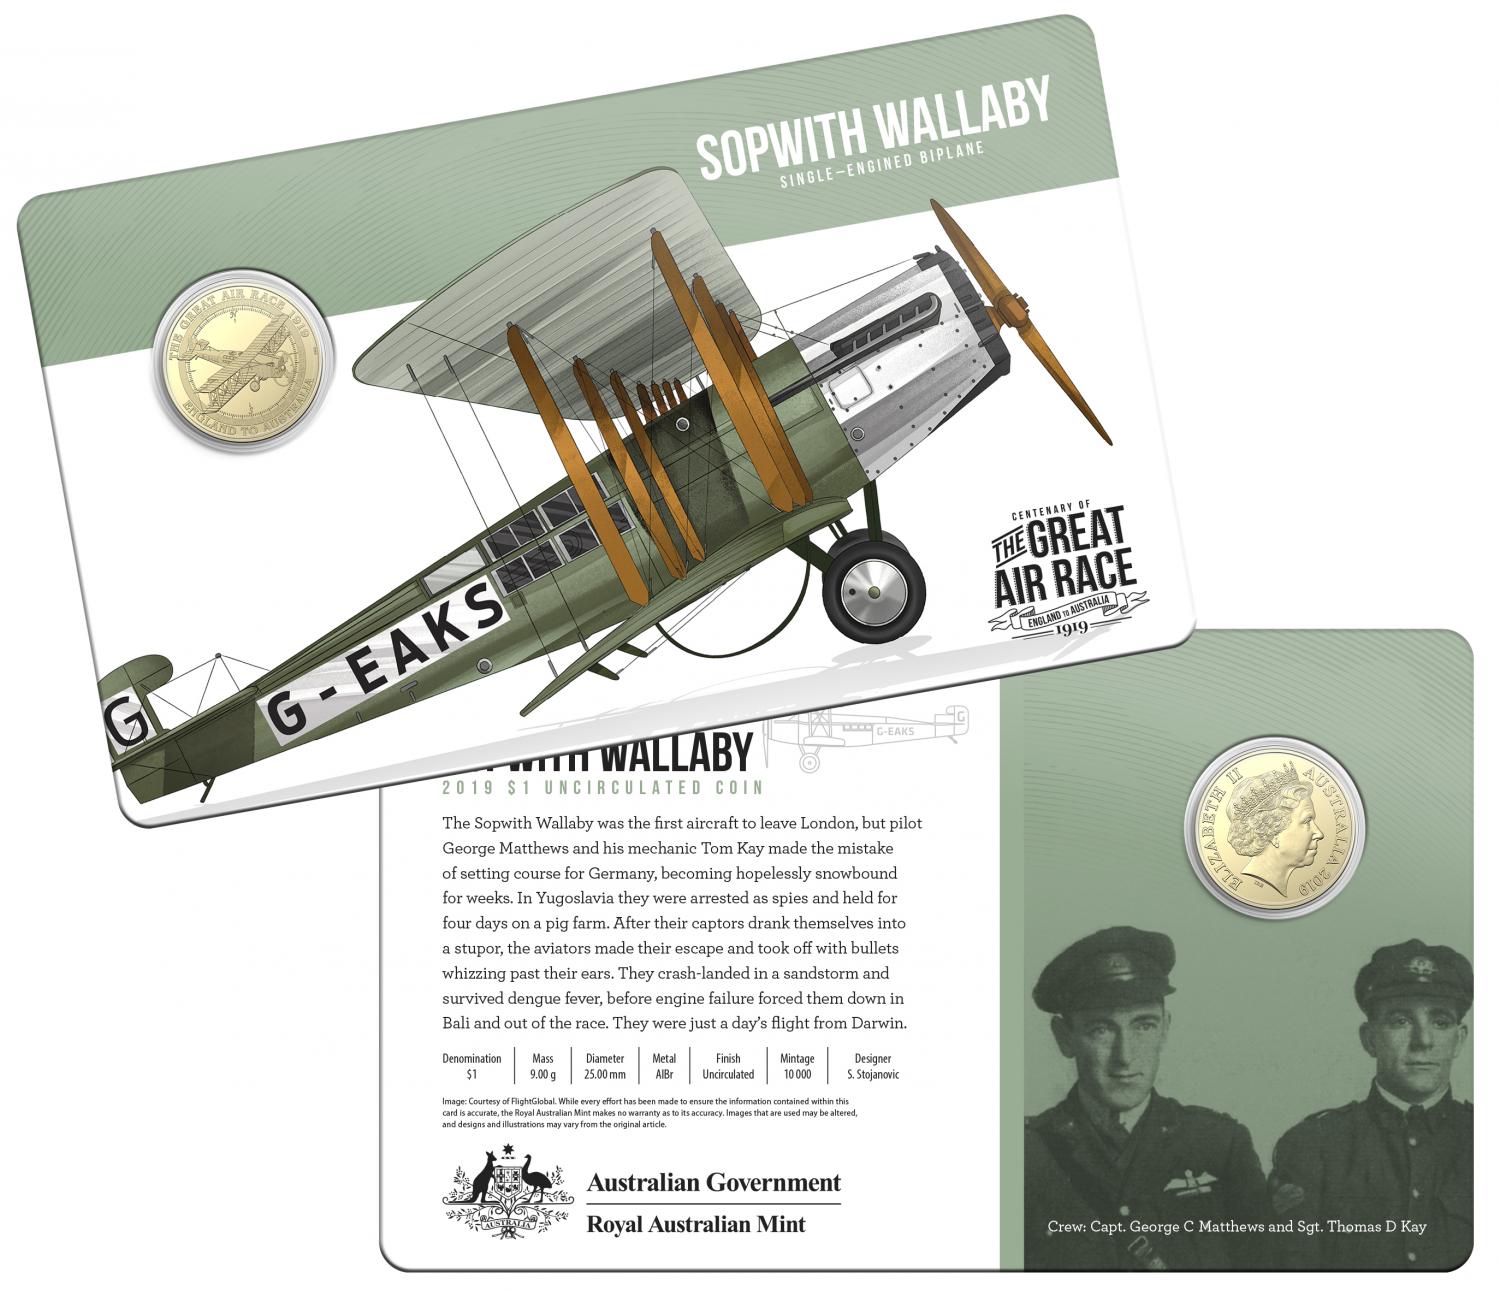 Thumbnail for 2019 Centenary off the Great Air Race Uncirculated $1.00 - Sopwith Wallaby